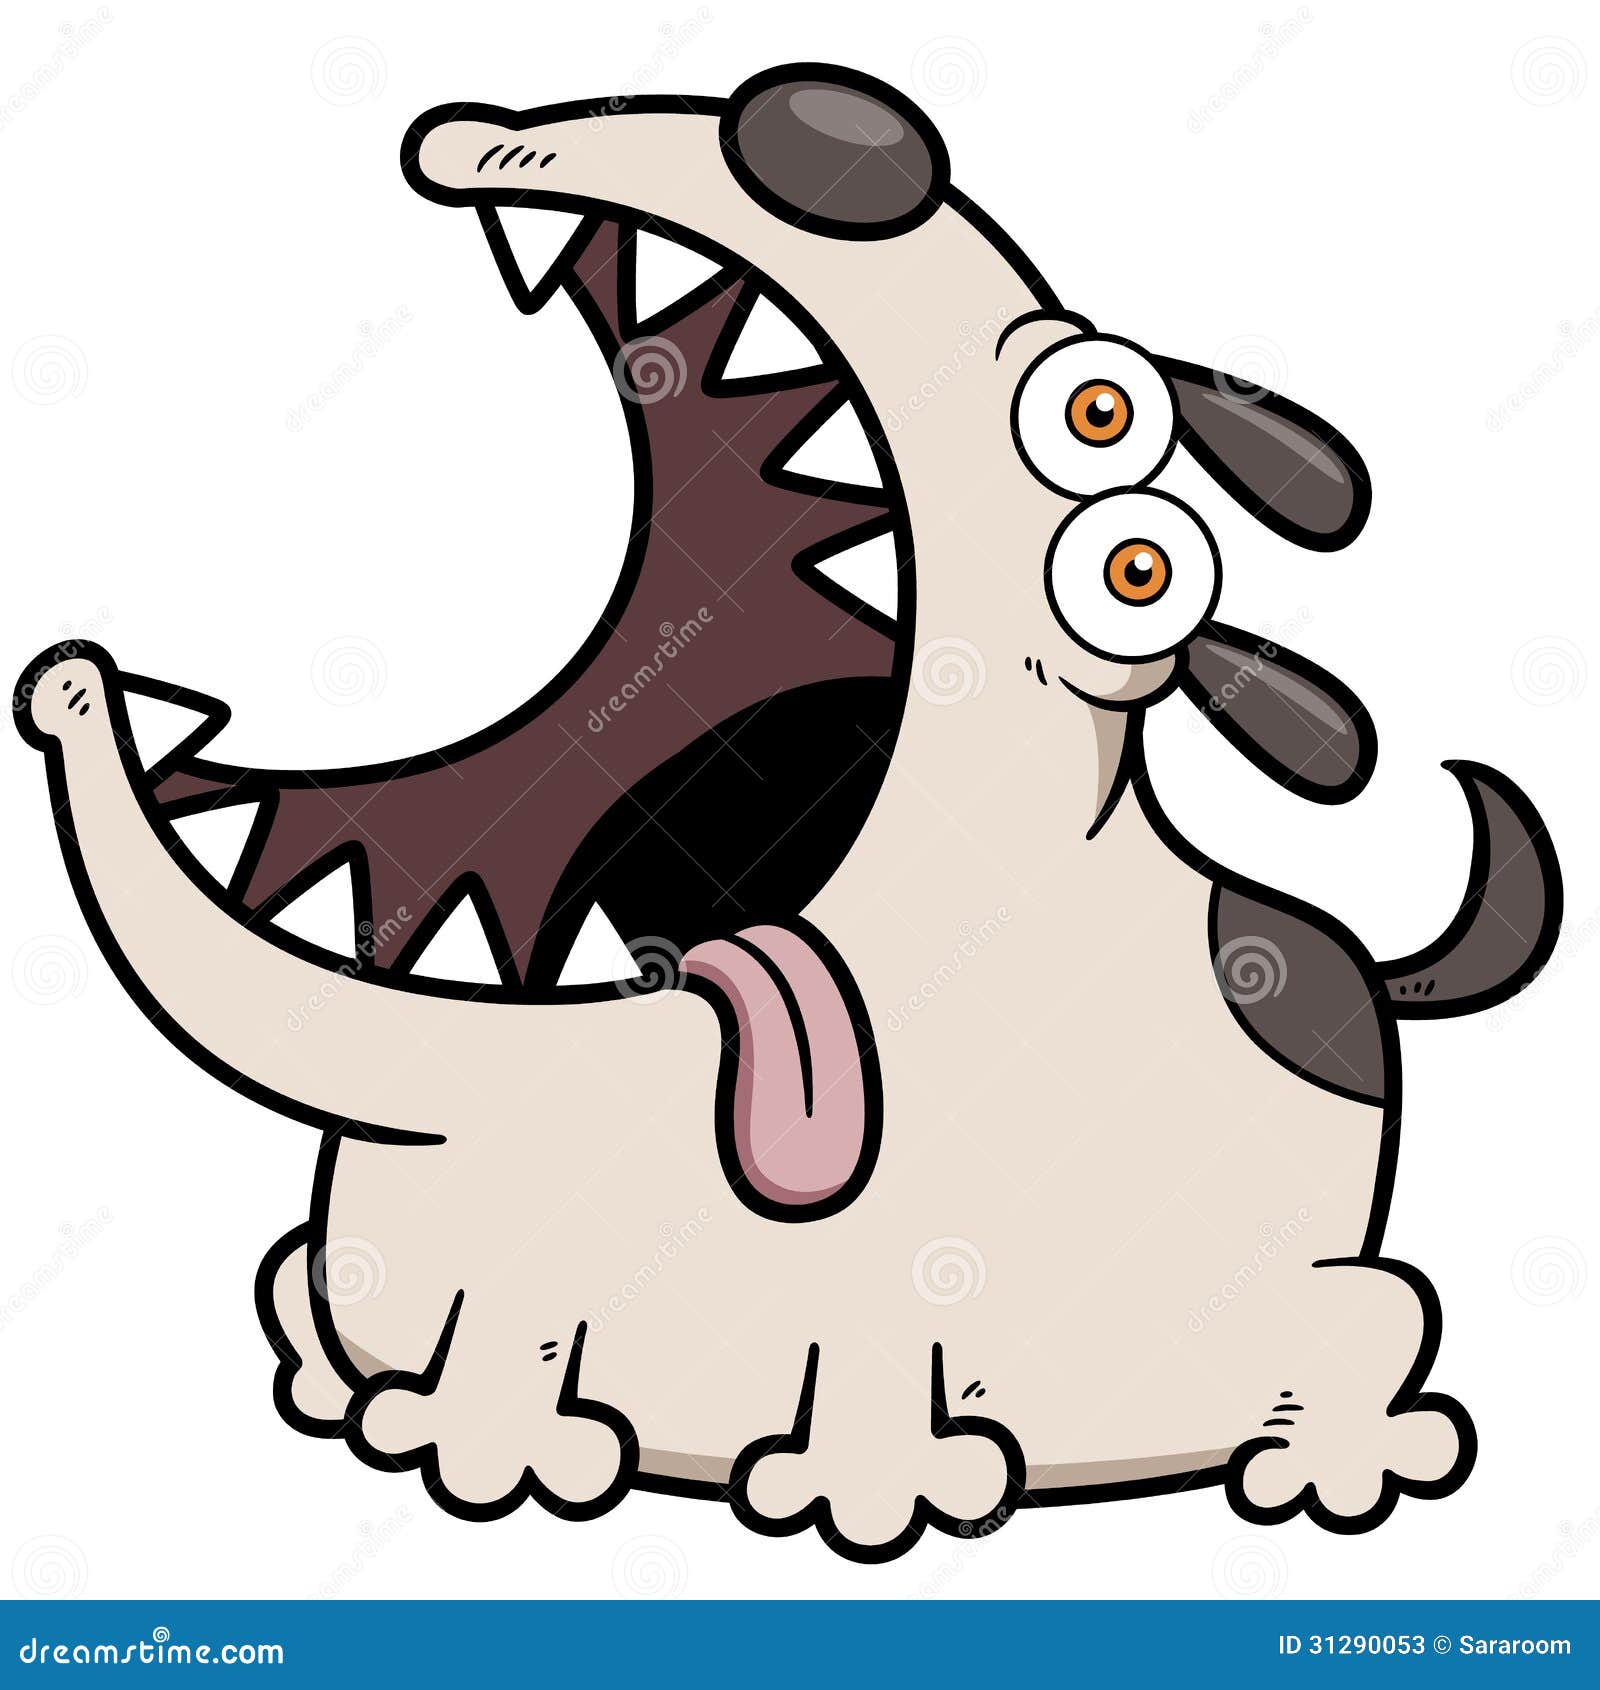 angry dog clipart - photo #43